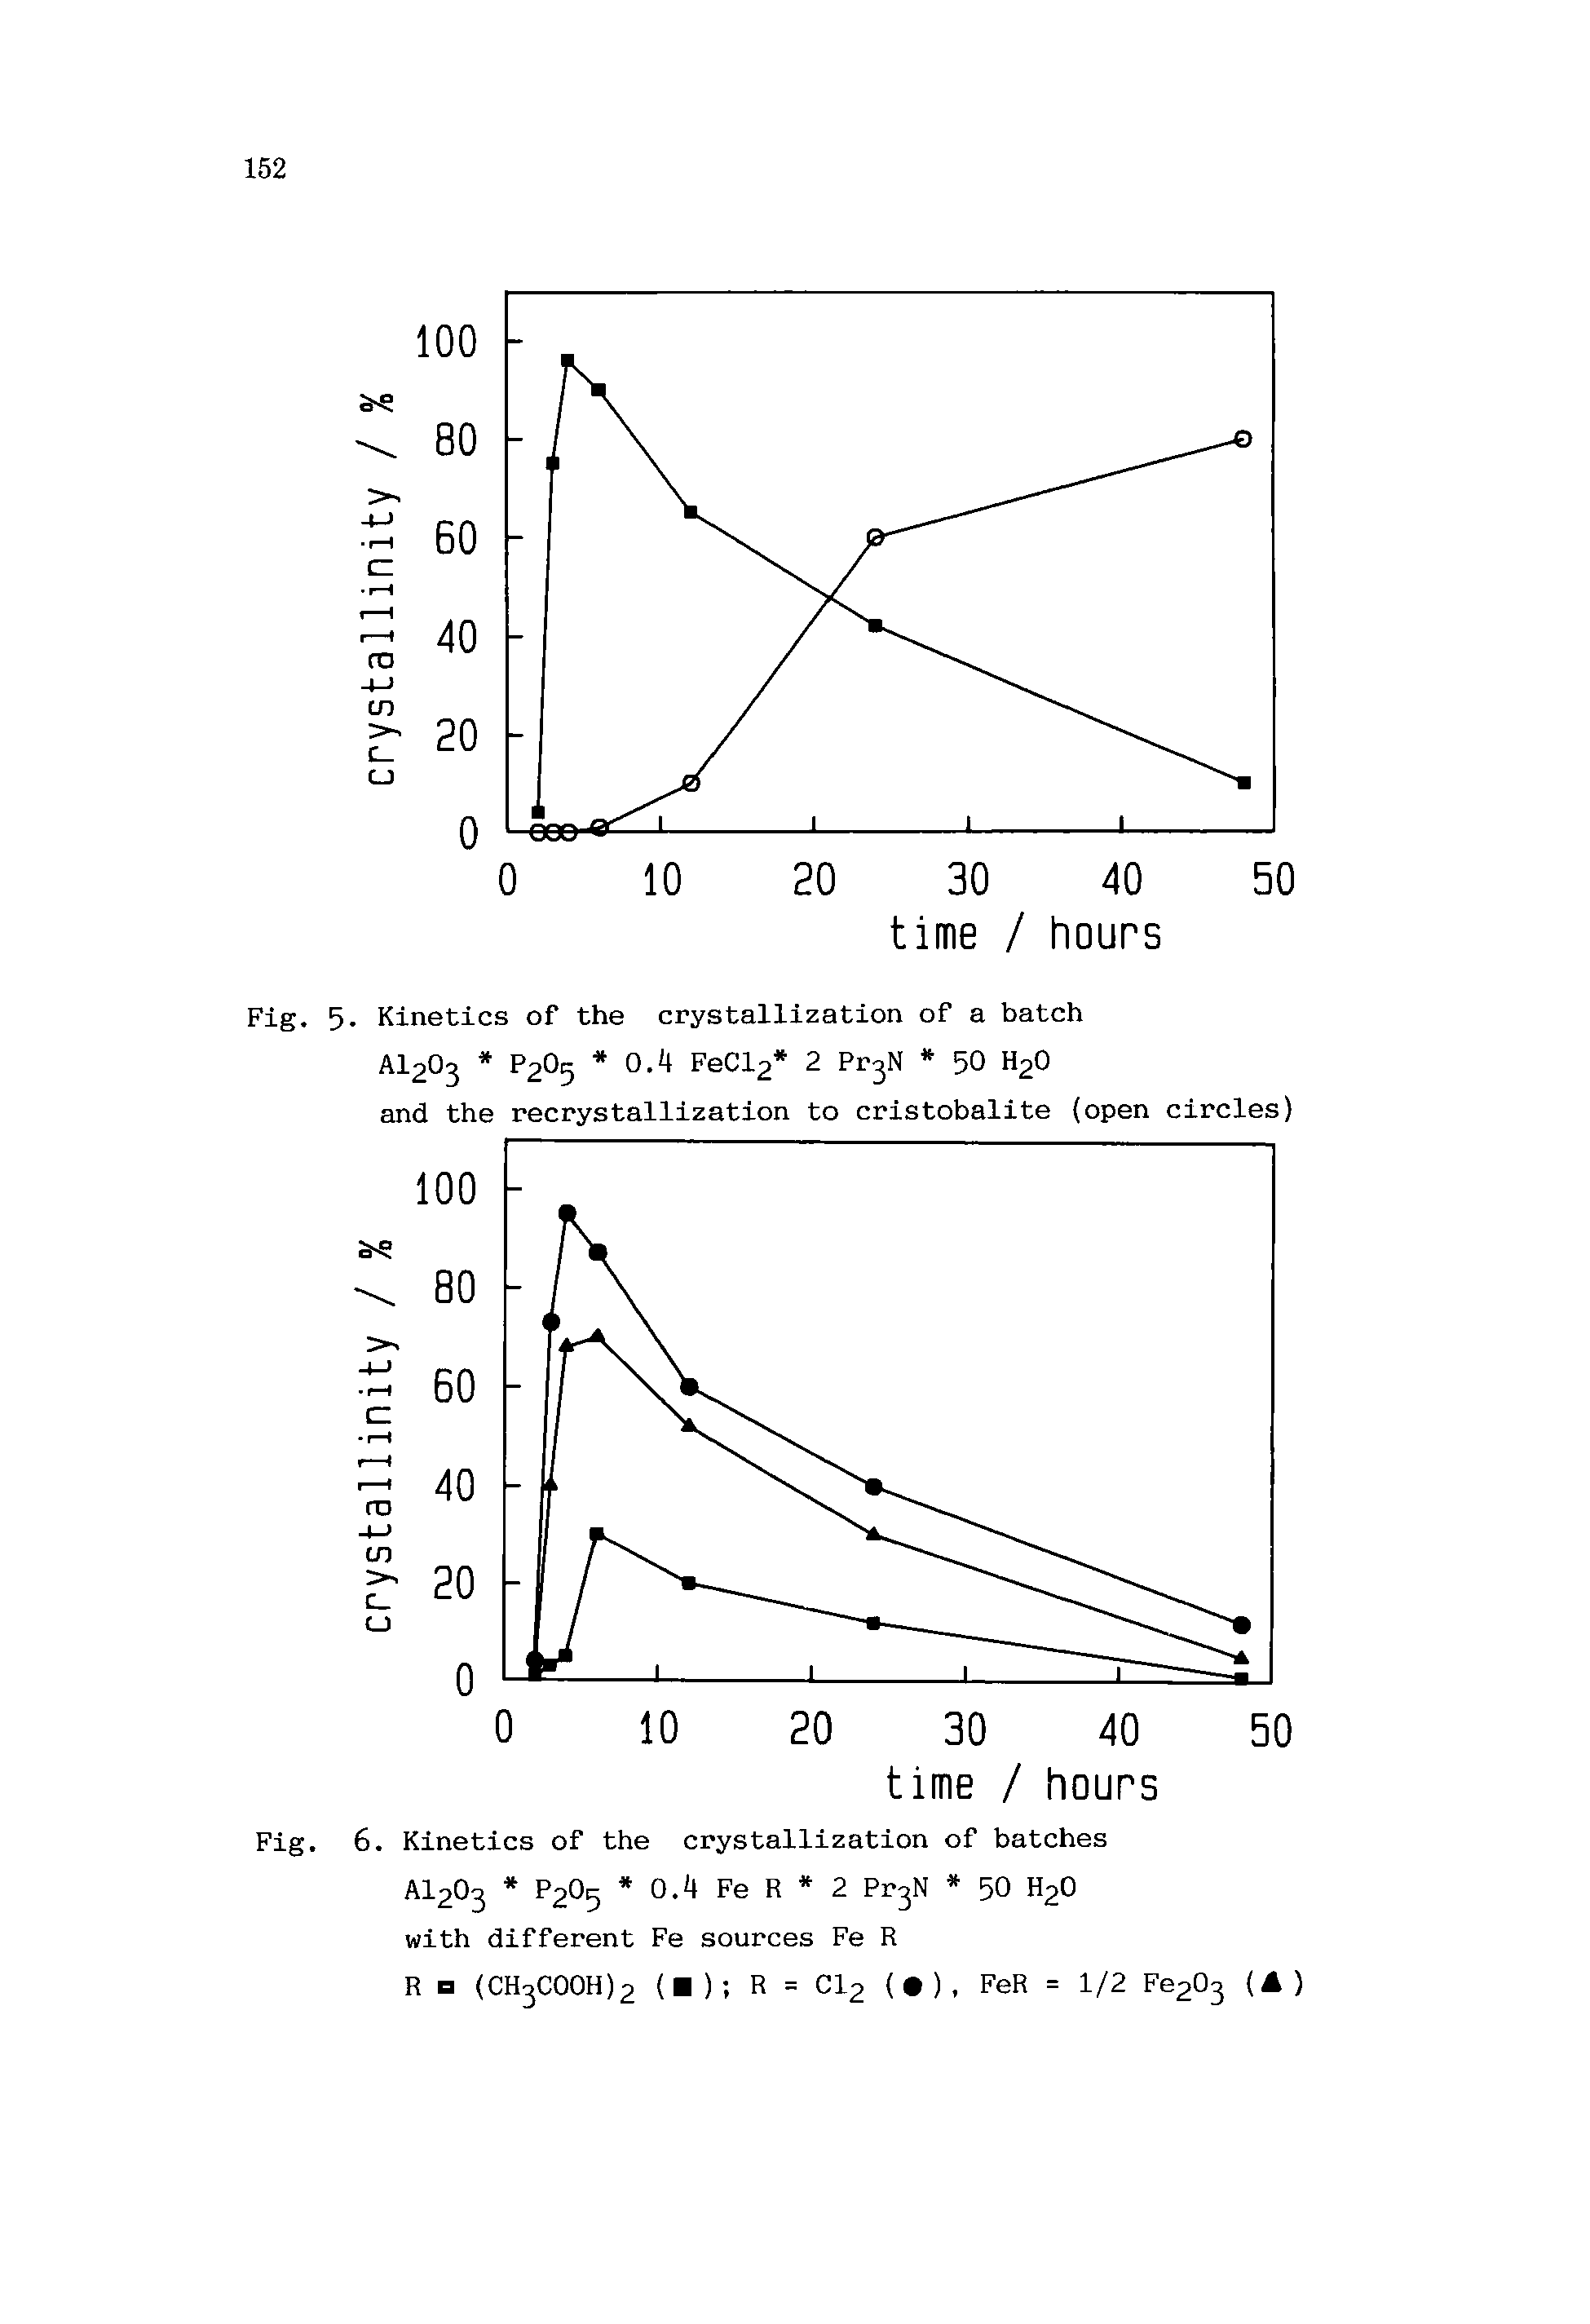 Fig. 5. Kinetics of the crystallization of a batch AI2O3 P2O5 0.4 FeCl2 2 PC3N 50 H2O and the recrystallization to cristobalite (open circles)...